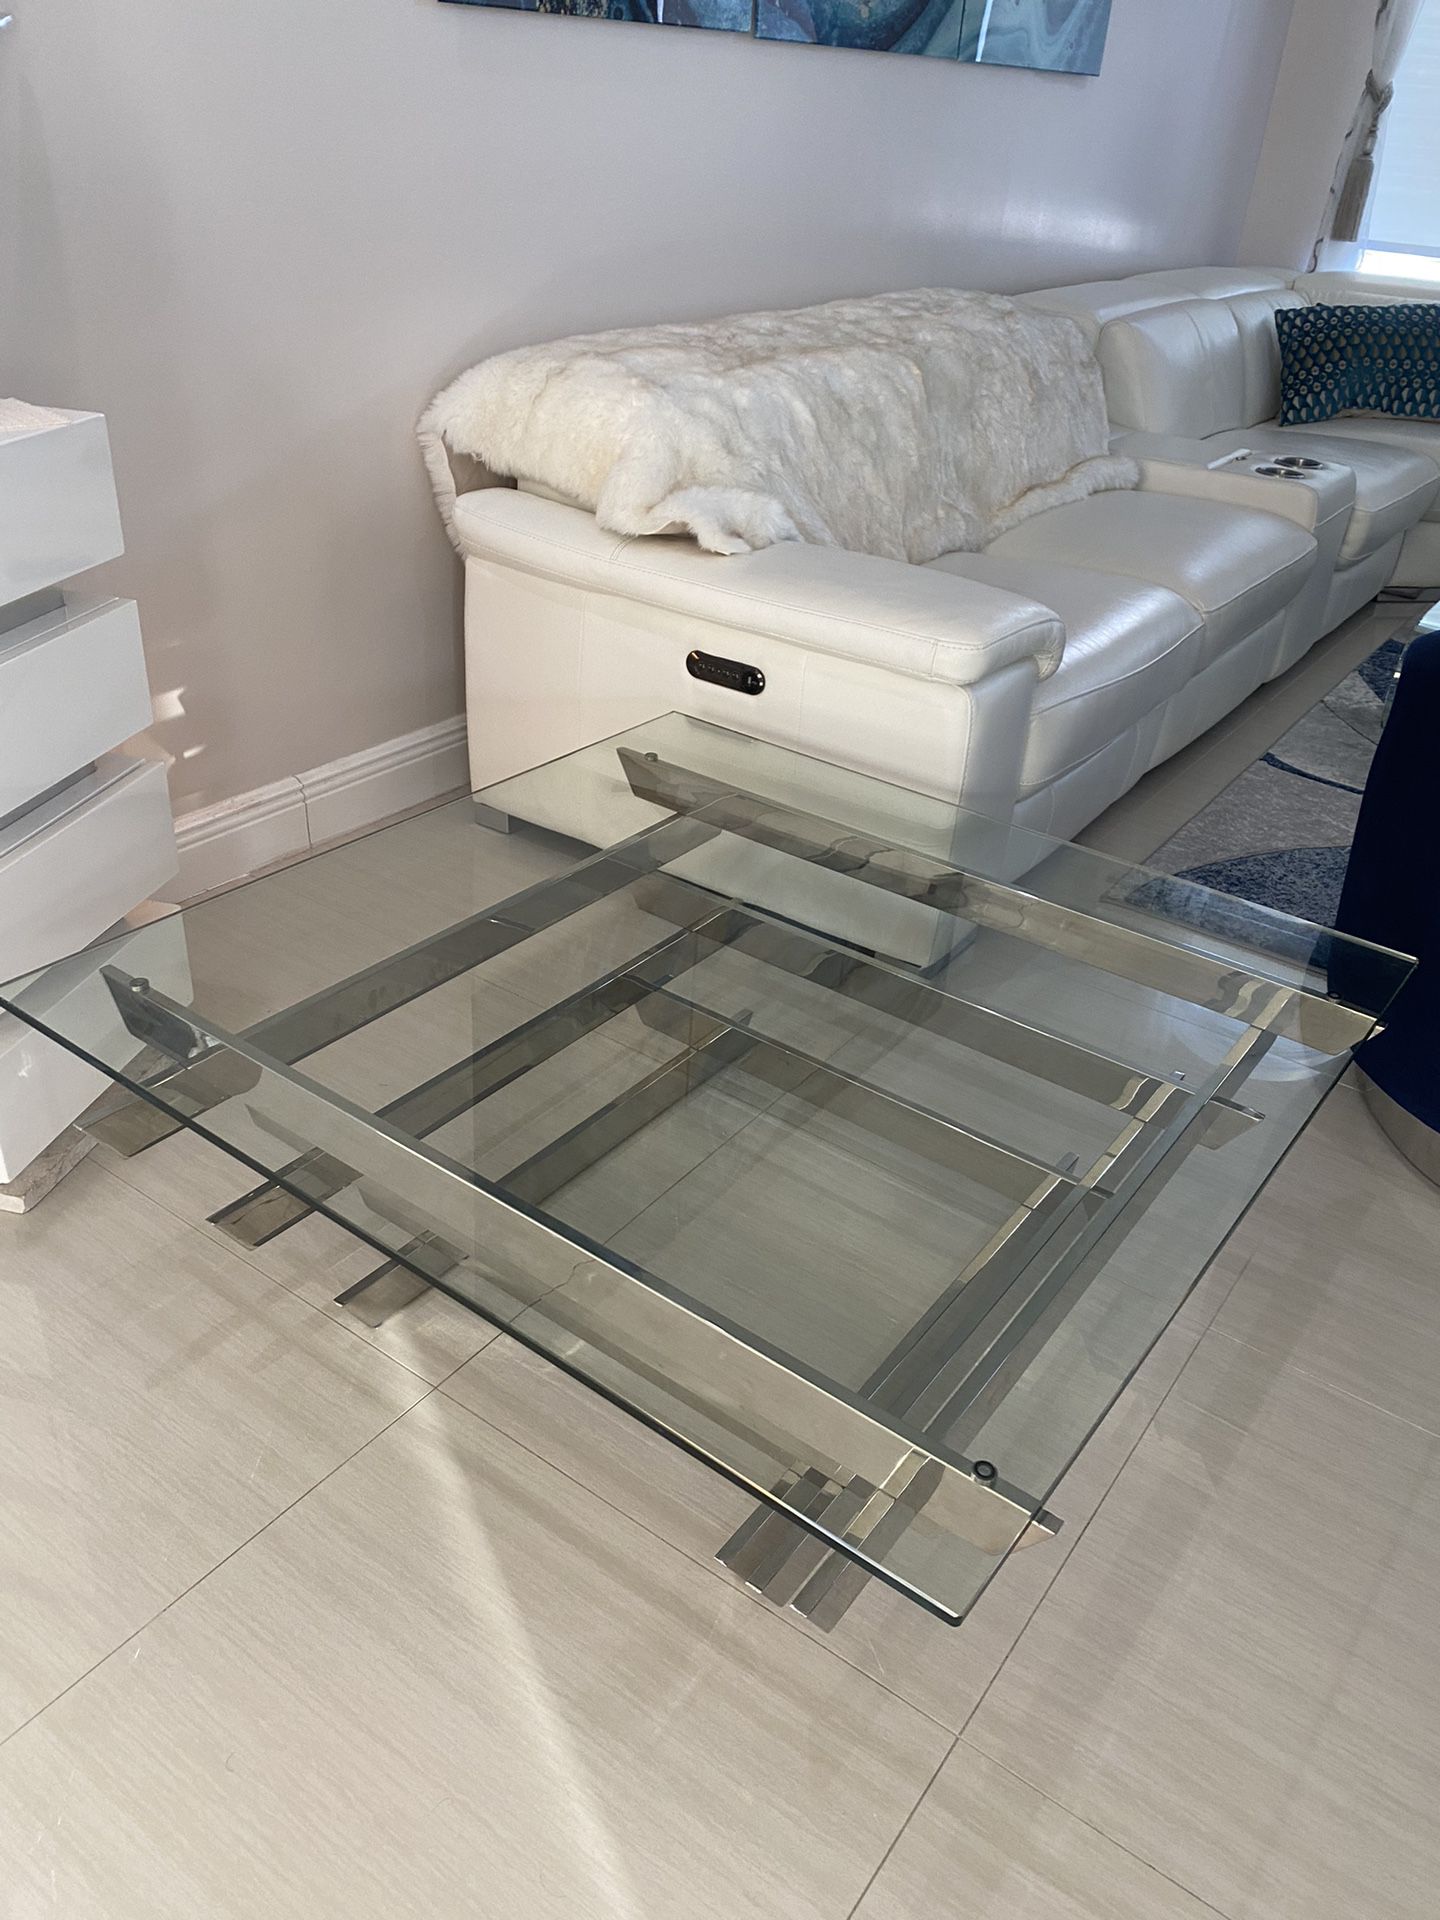 Levels Coffee Table